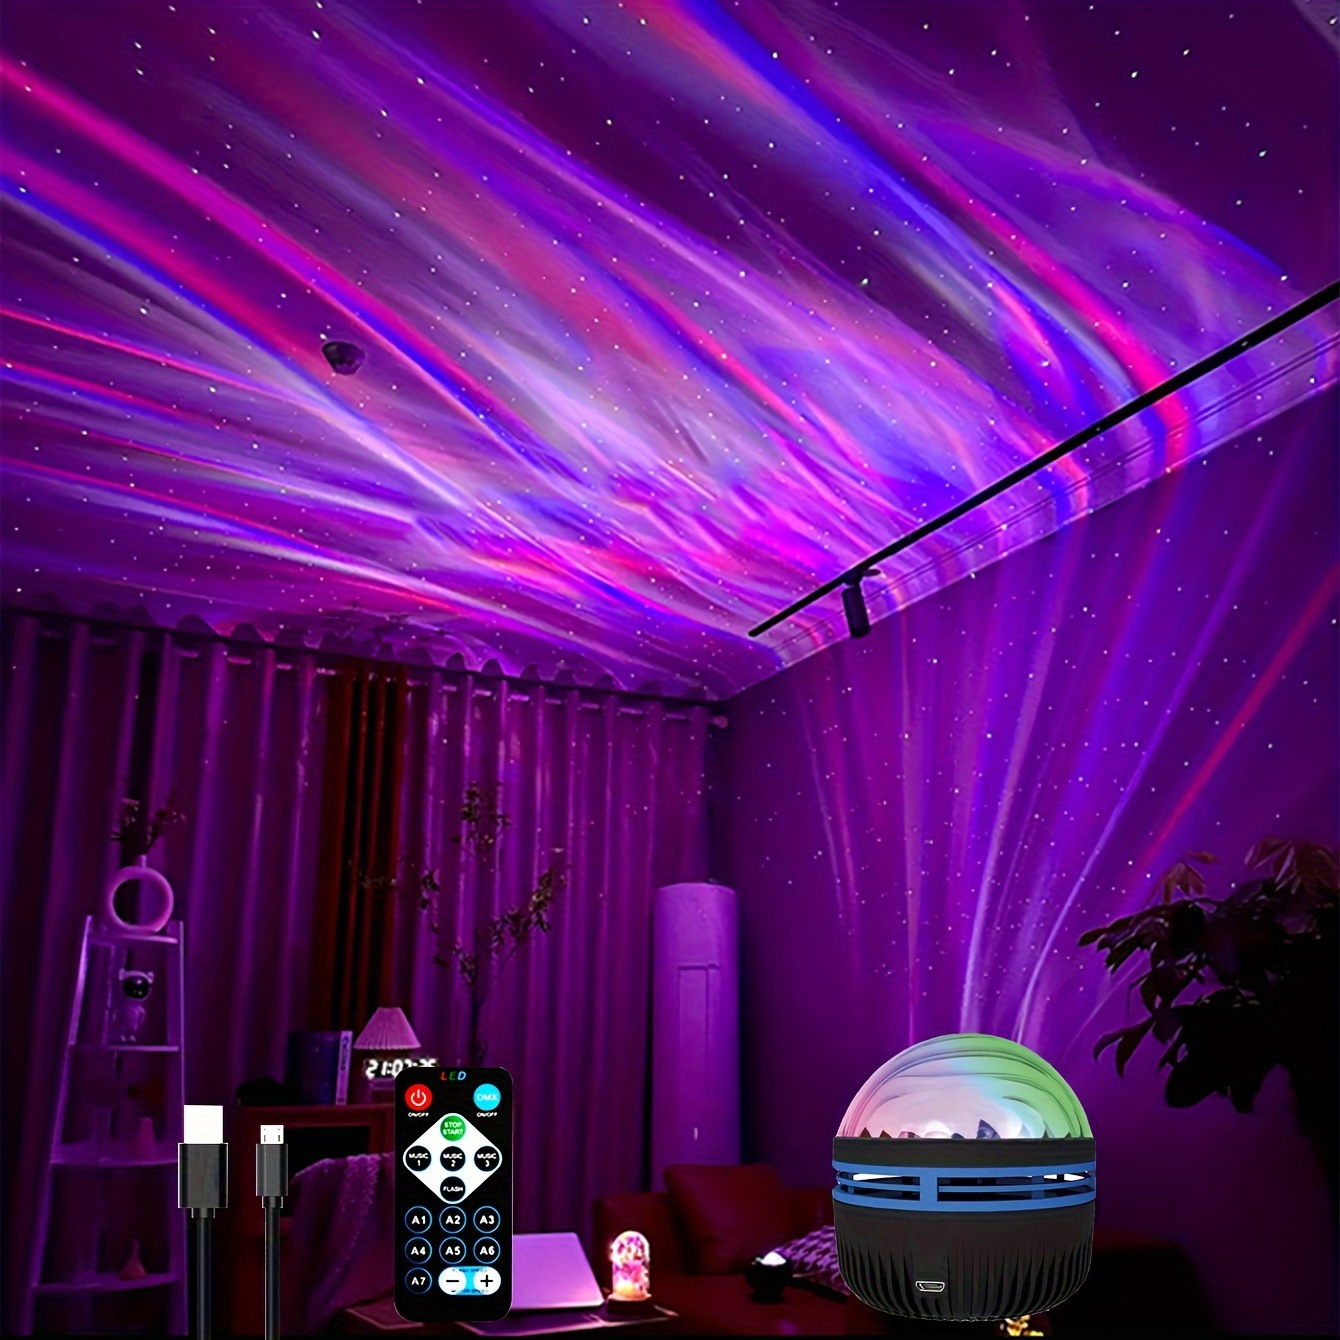 Smart Firework Led Lights USB Powered Color Changing LED Strip Lights with  App Control, Remote, Control Box,with Launch Burst Effect and Music Sync  Lights for Bedroom, Room, Christmas, Party